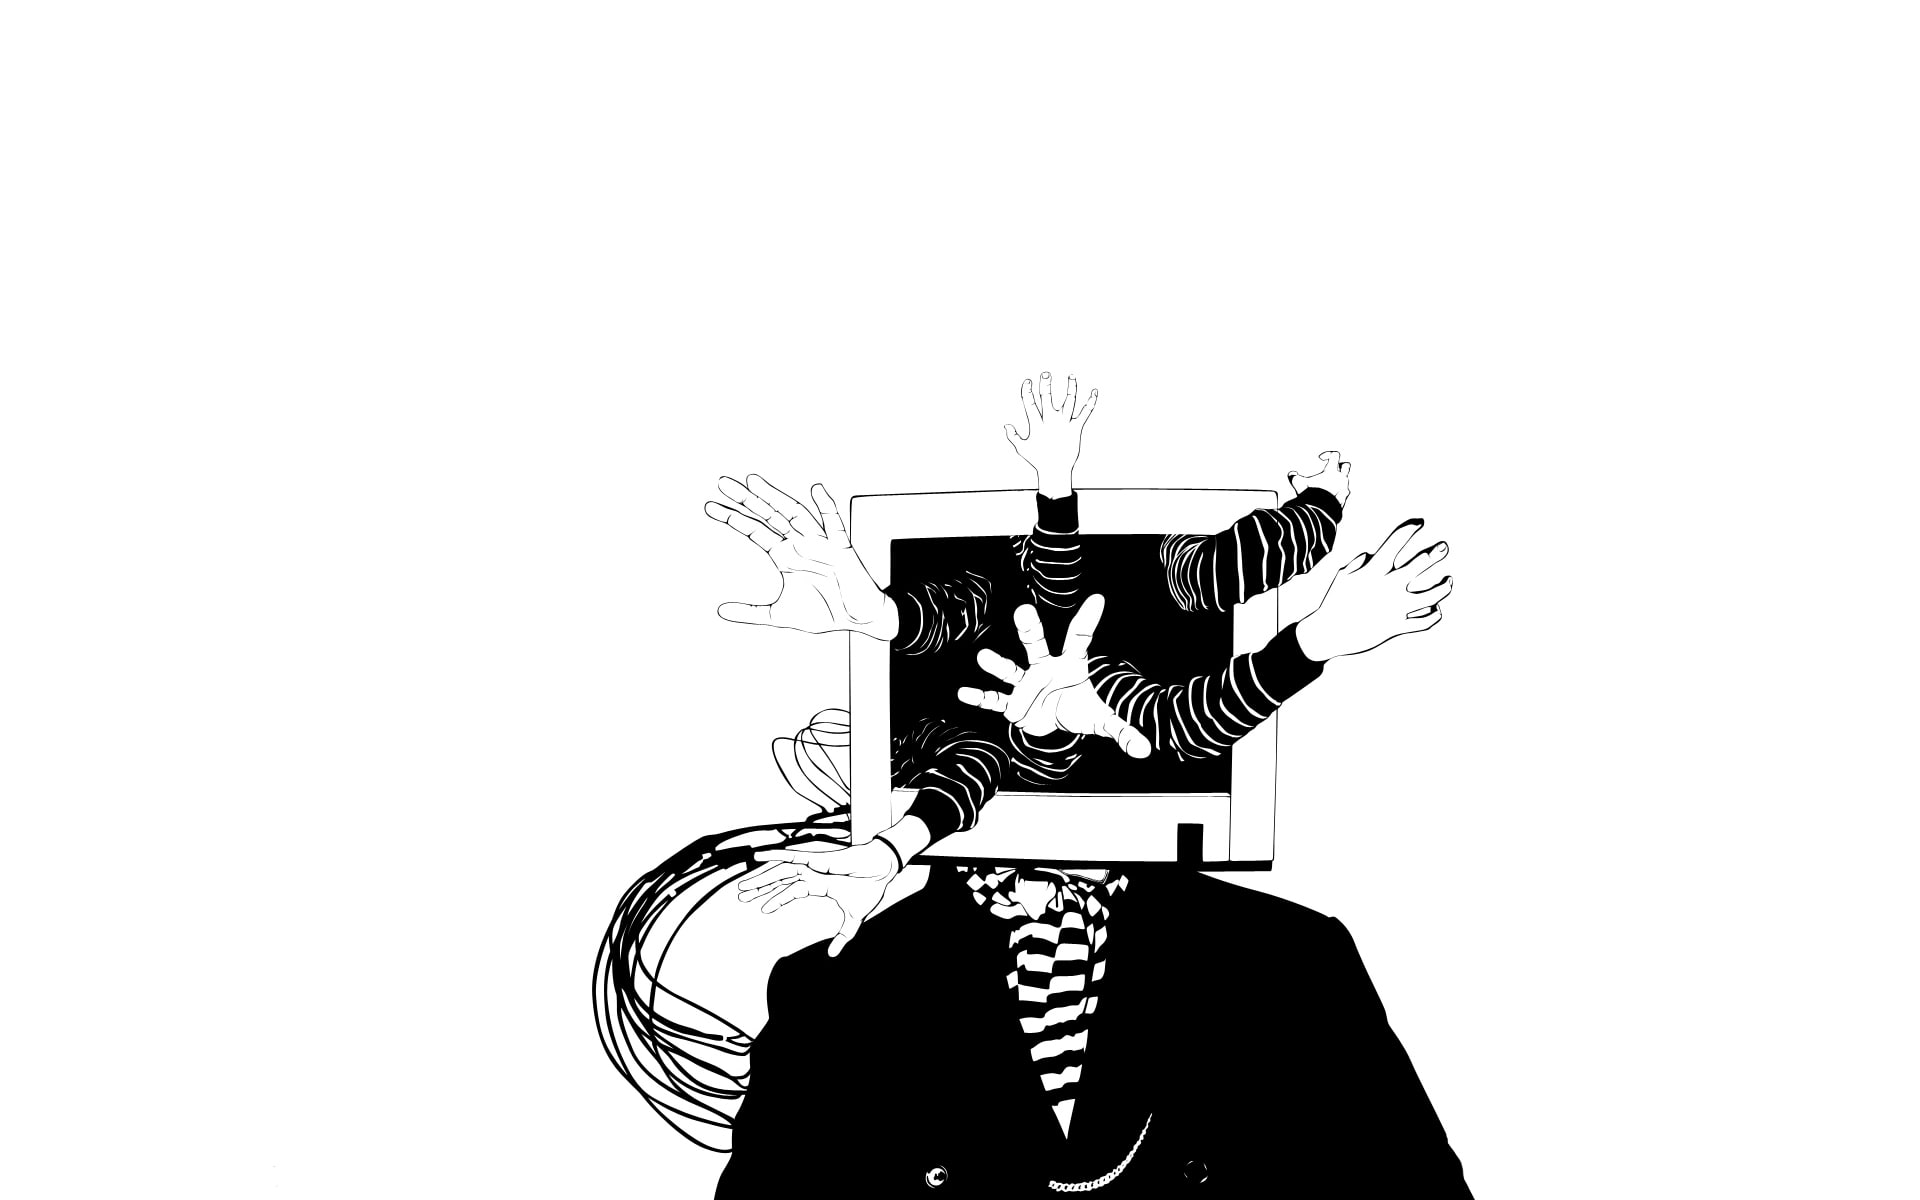 Monitor Abstract BW White HD, black suit jacket and monitor with hands illustration